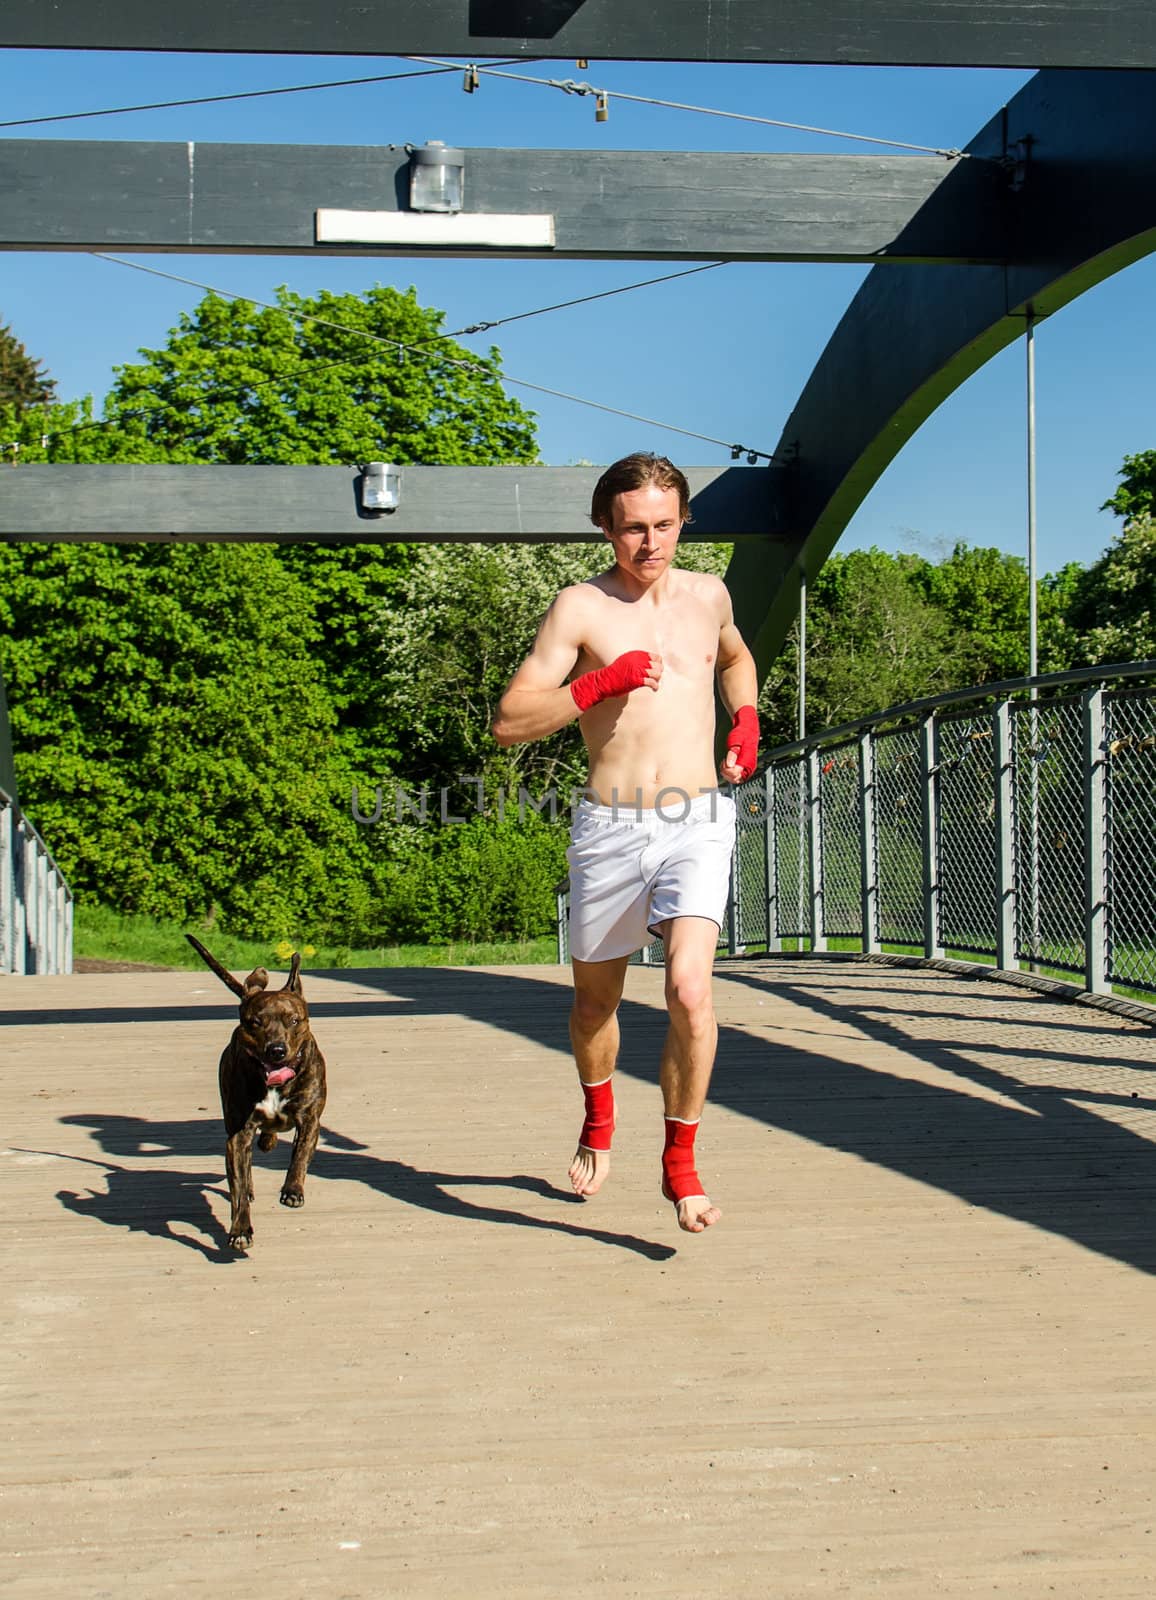 Training before the fight. Boxer and dog running outdoors. 